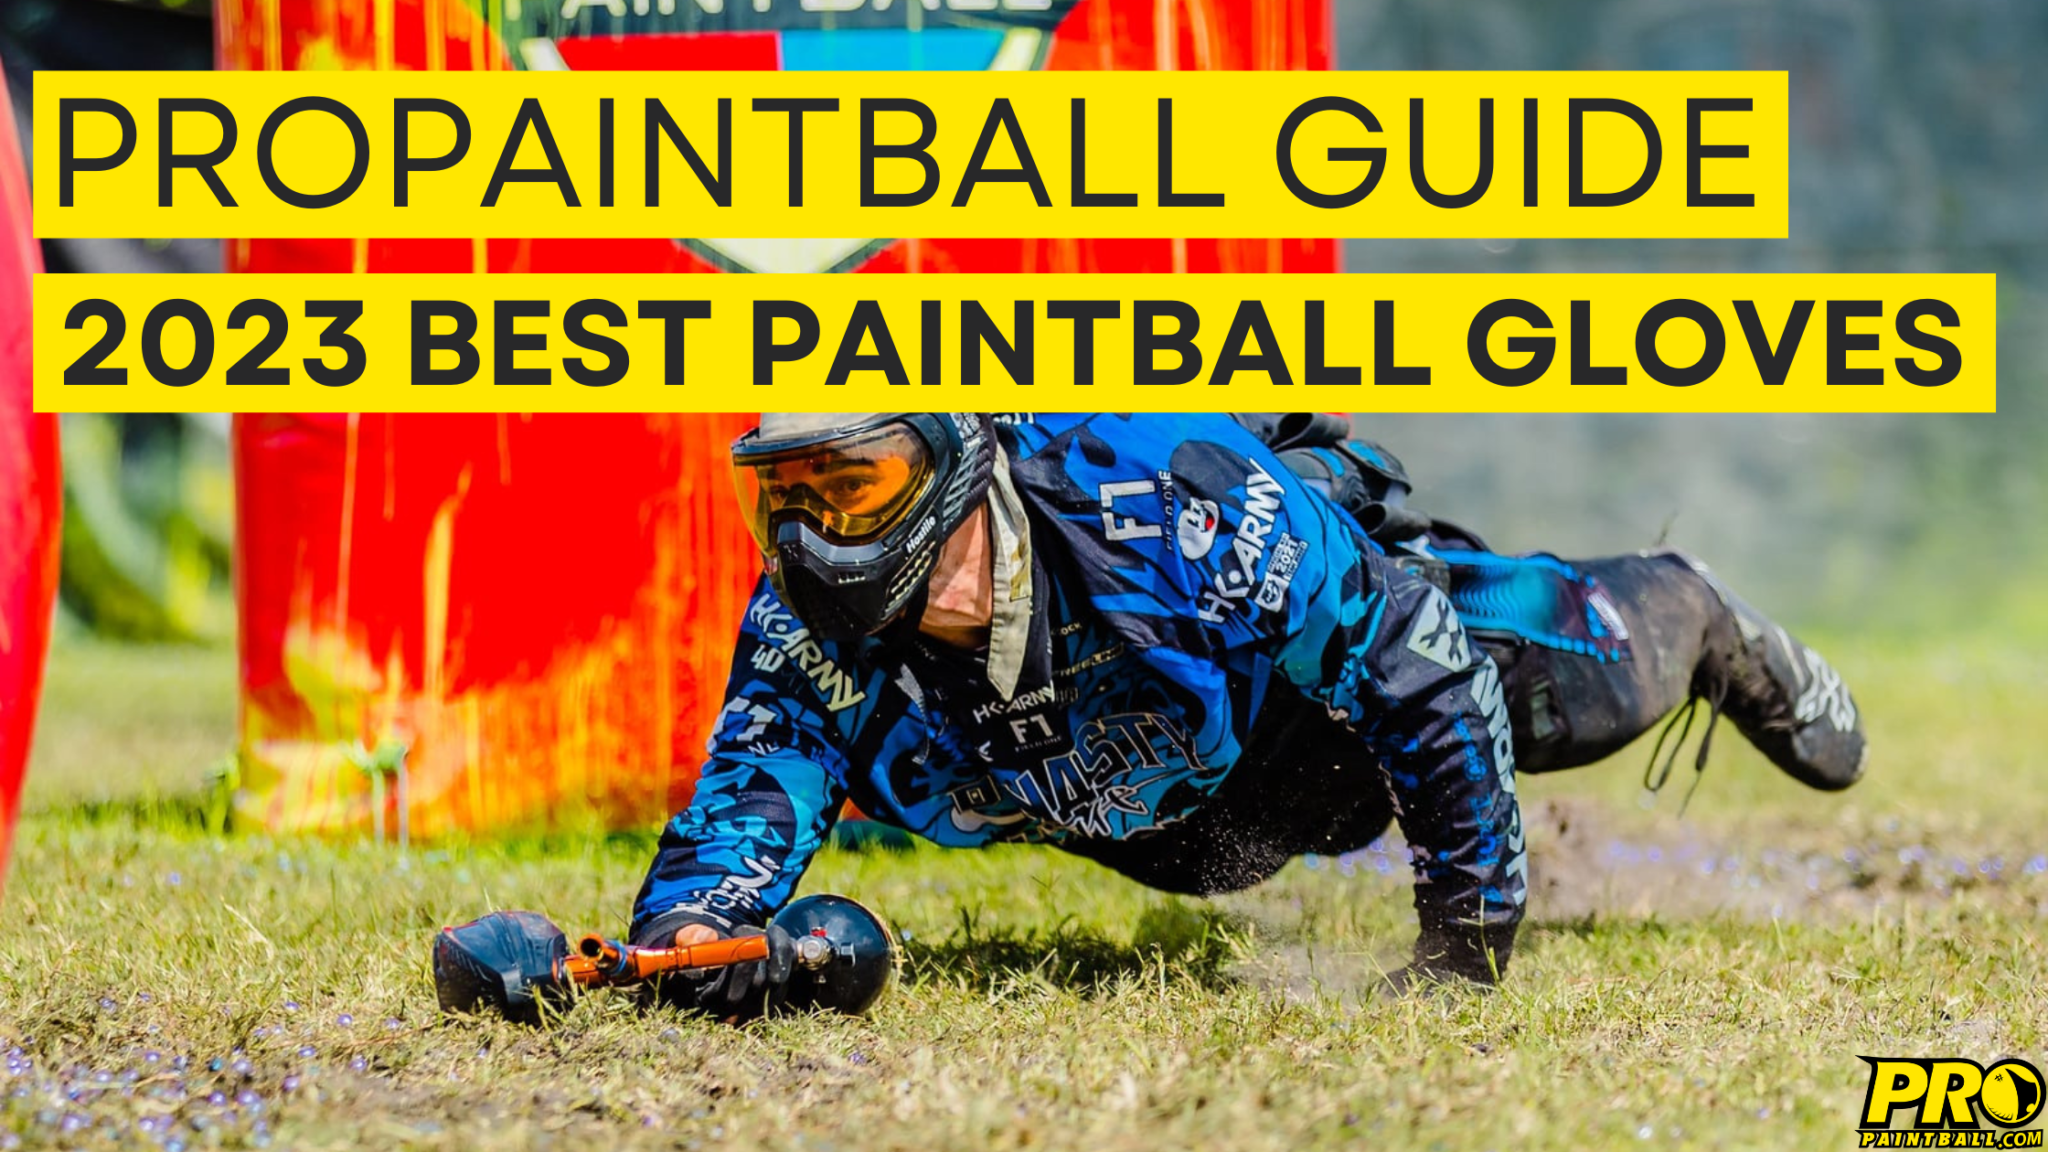 Top 3 Best Paintball Gloves